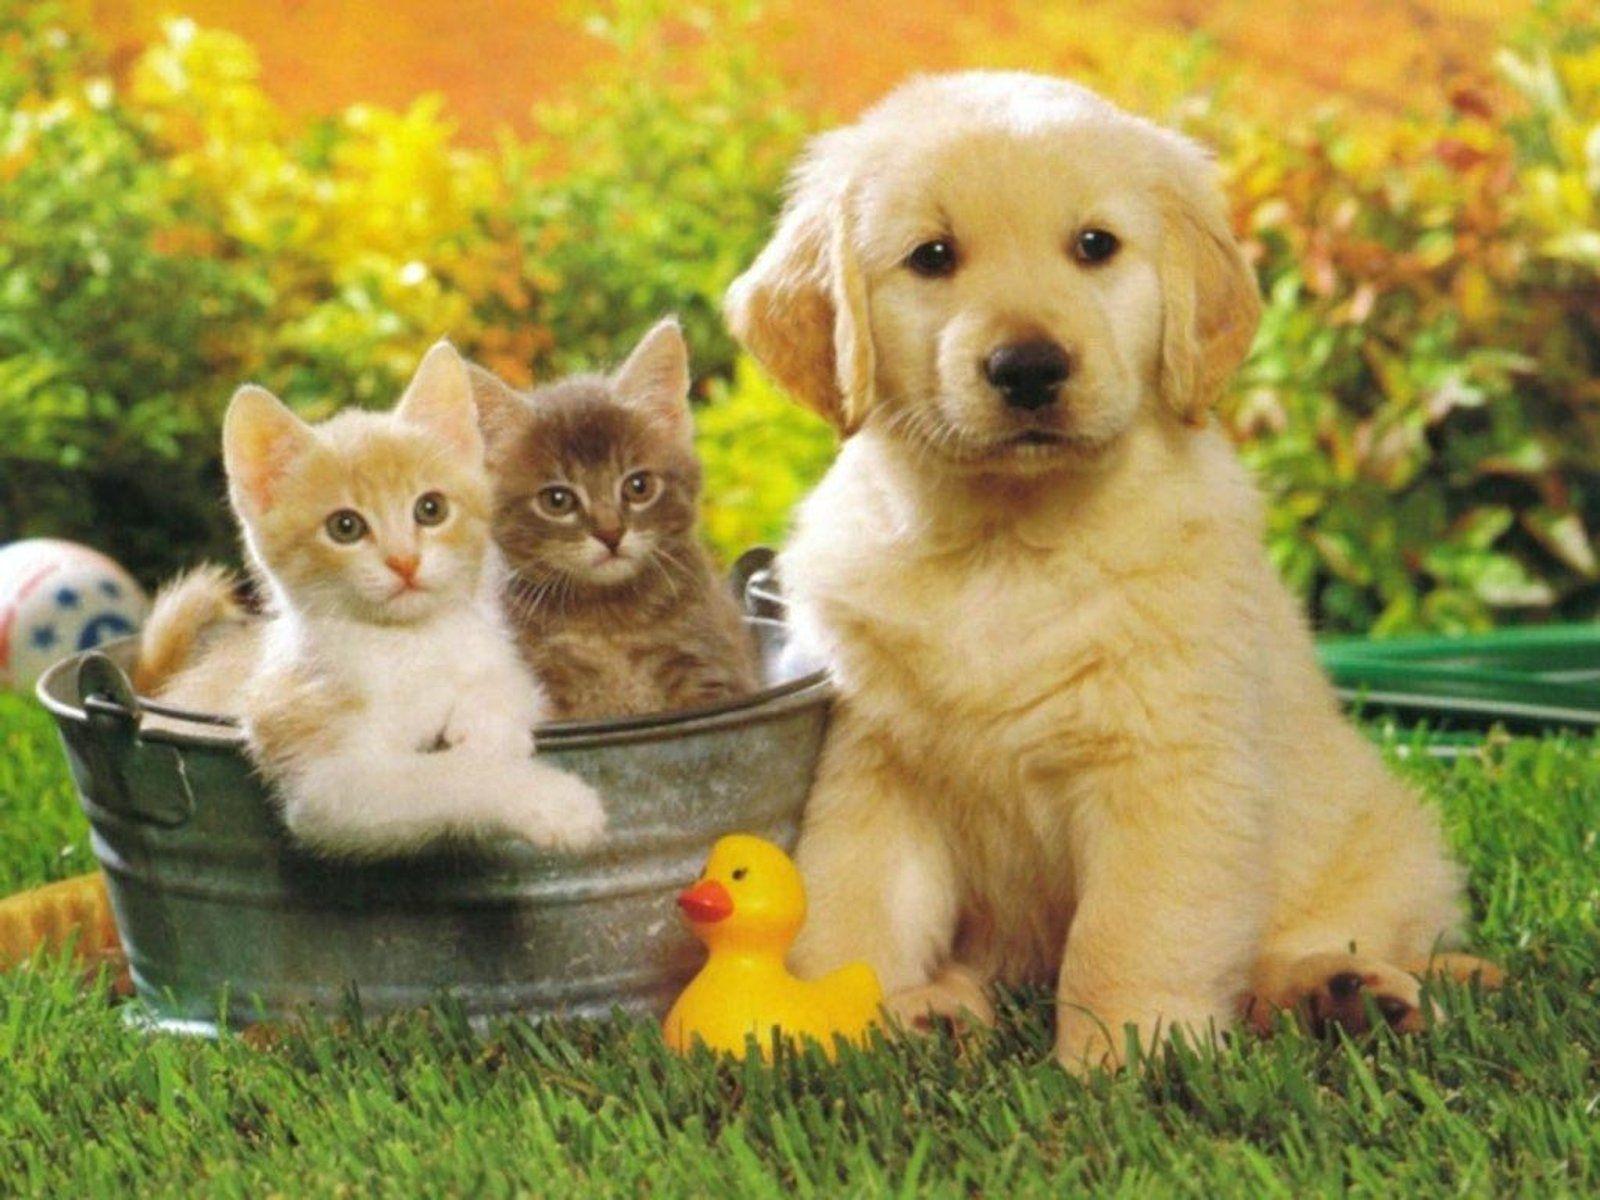 Cute Puppies And Kittens Wallpapers Wallpapers